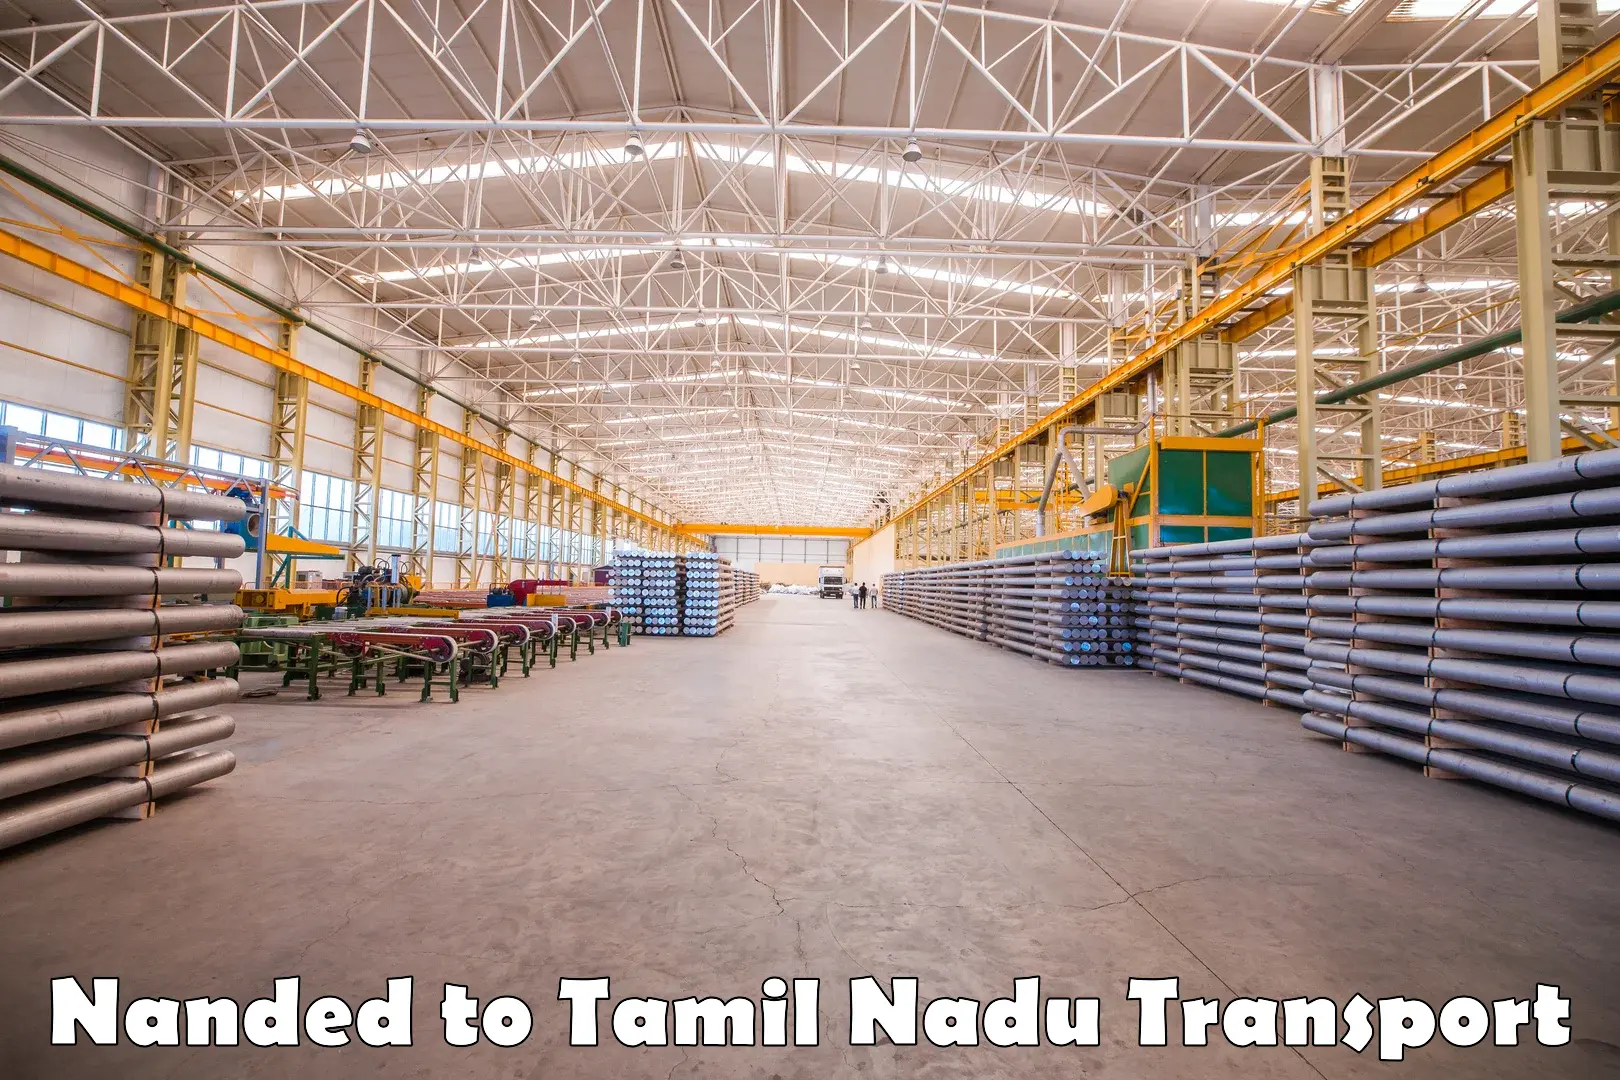 Cargo train transport services Nanded to Bharathiar University Coimbatore